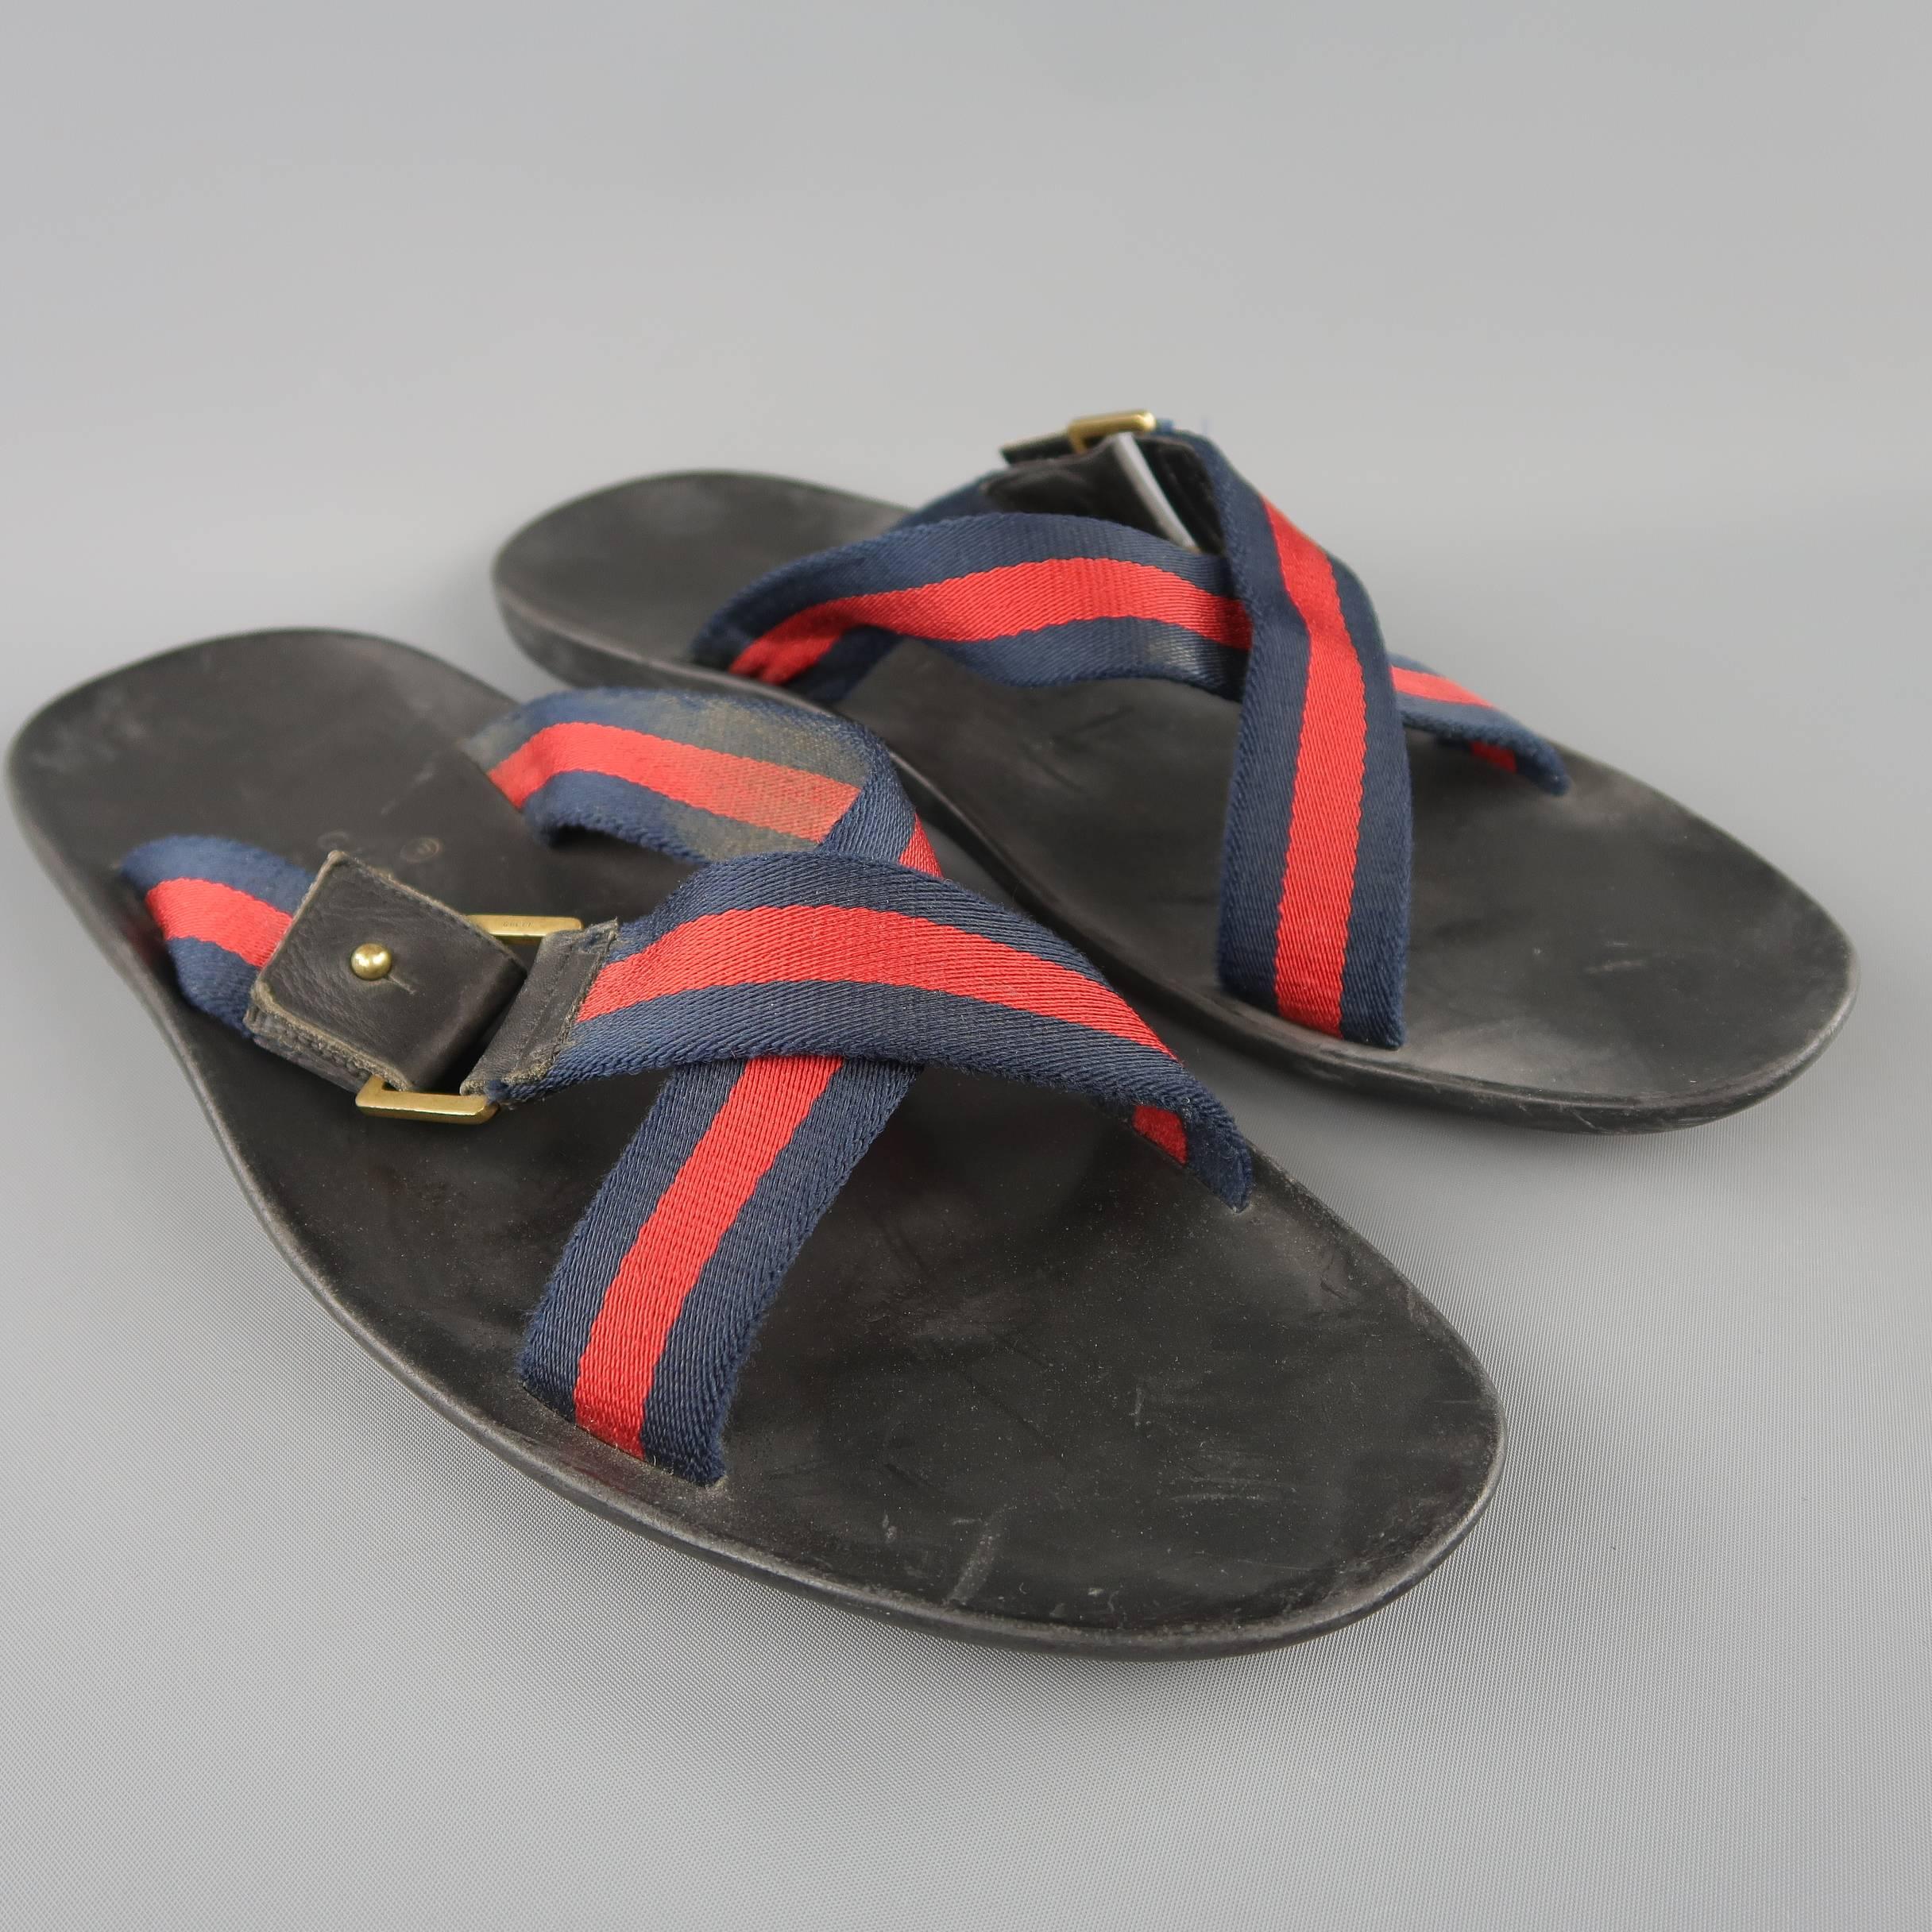 GUCCI sandals feature signature navy and red webbing canvas X straps with a leather detailed buckle and rubber sole. Heavy wear throughout. As-is. Made in Italy.
 
Fair Pre-Owned Condition.
Marked: (no size)
 
Outsole: 12 x 4.5 in.
